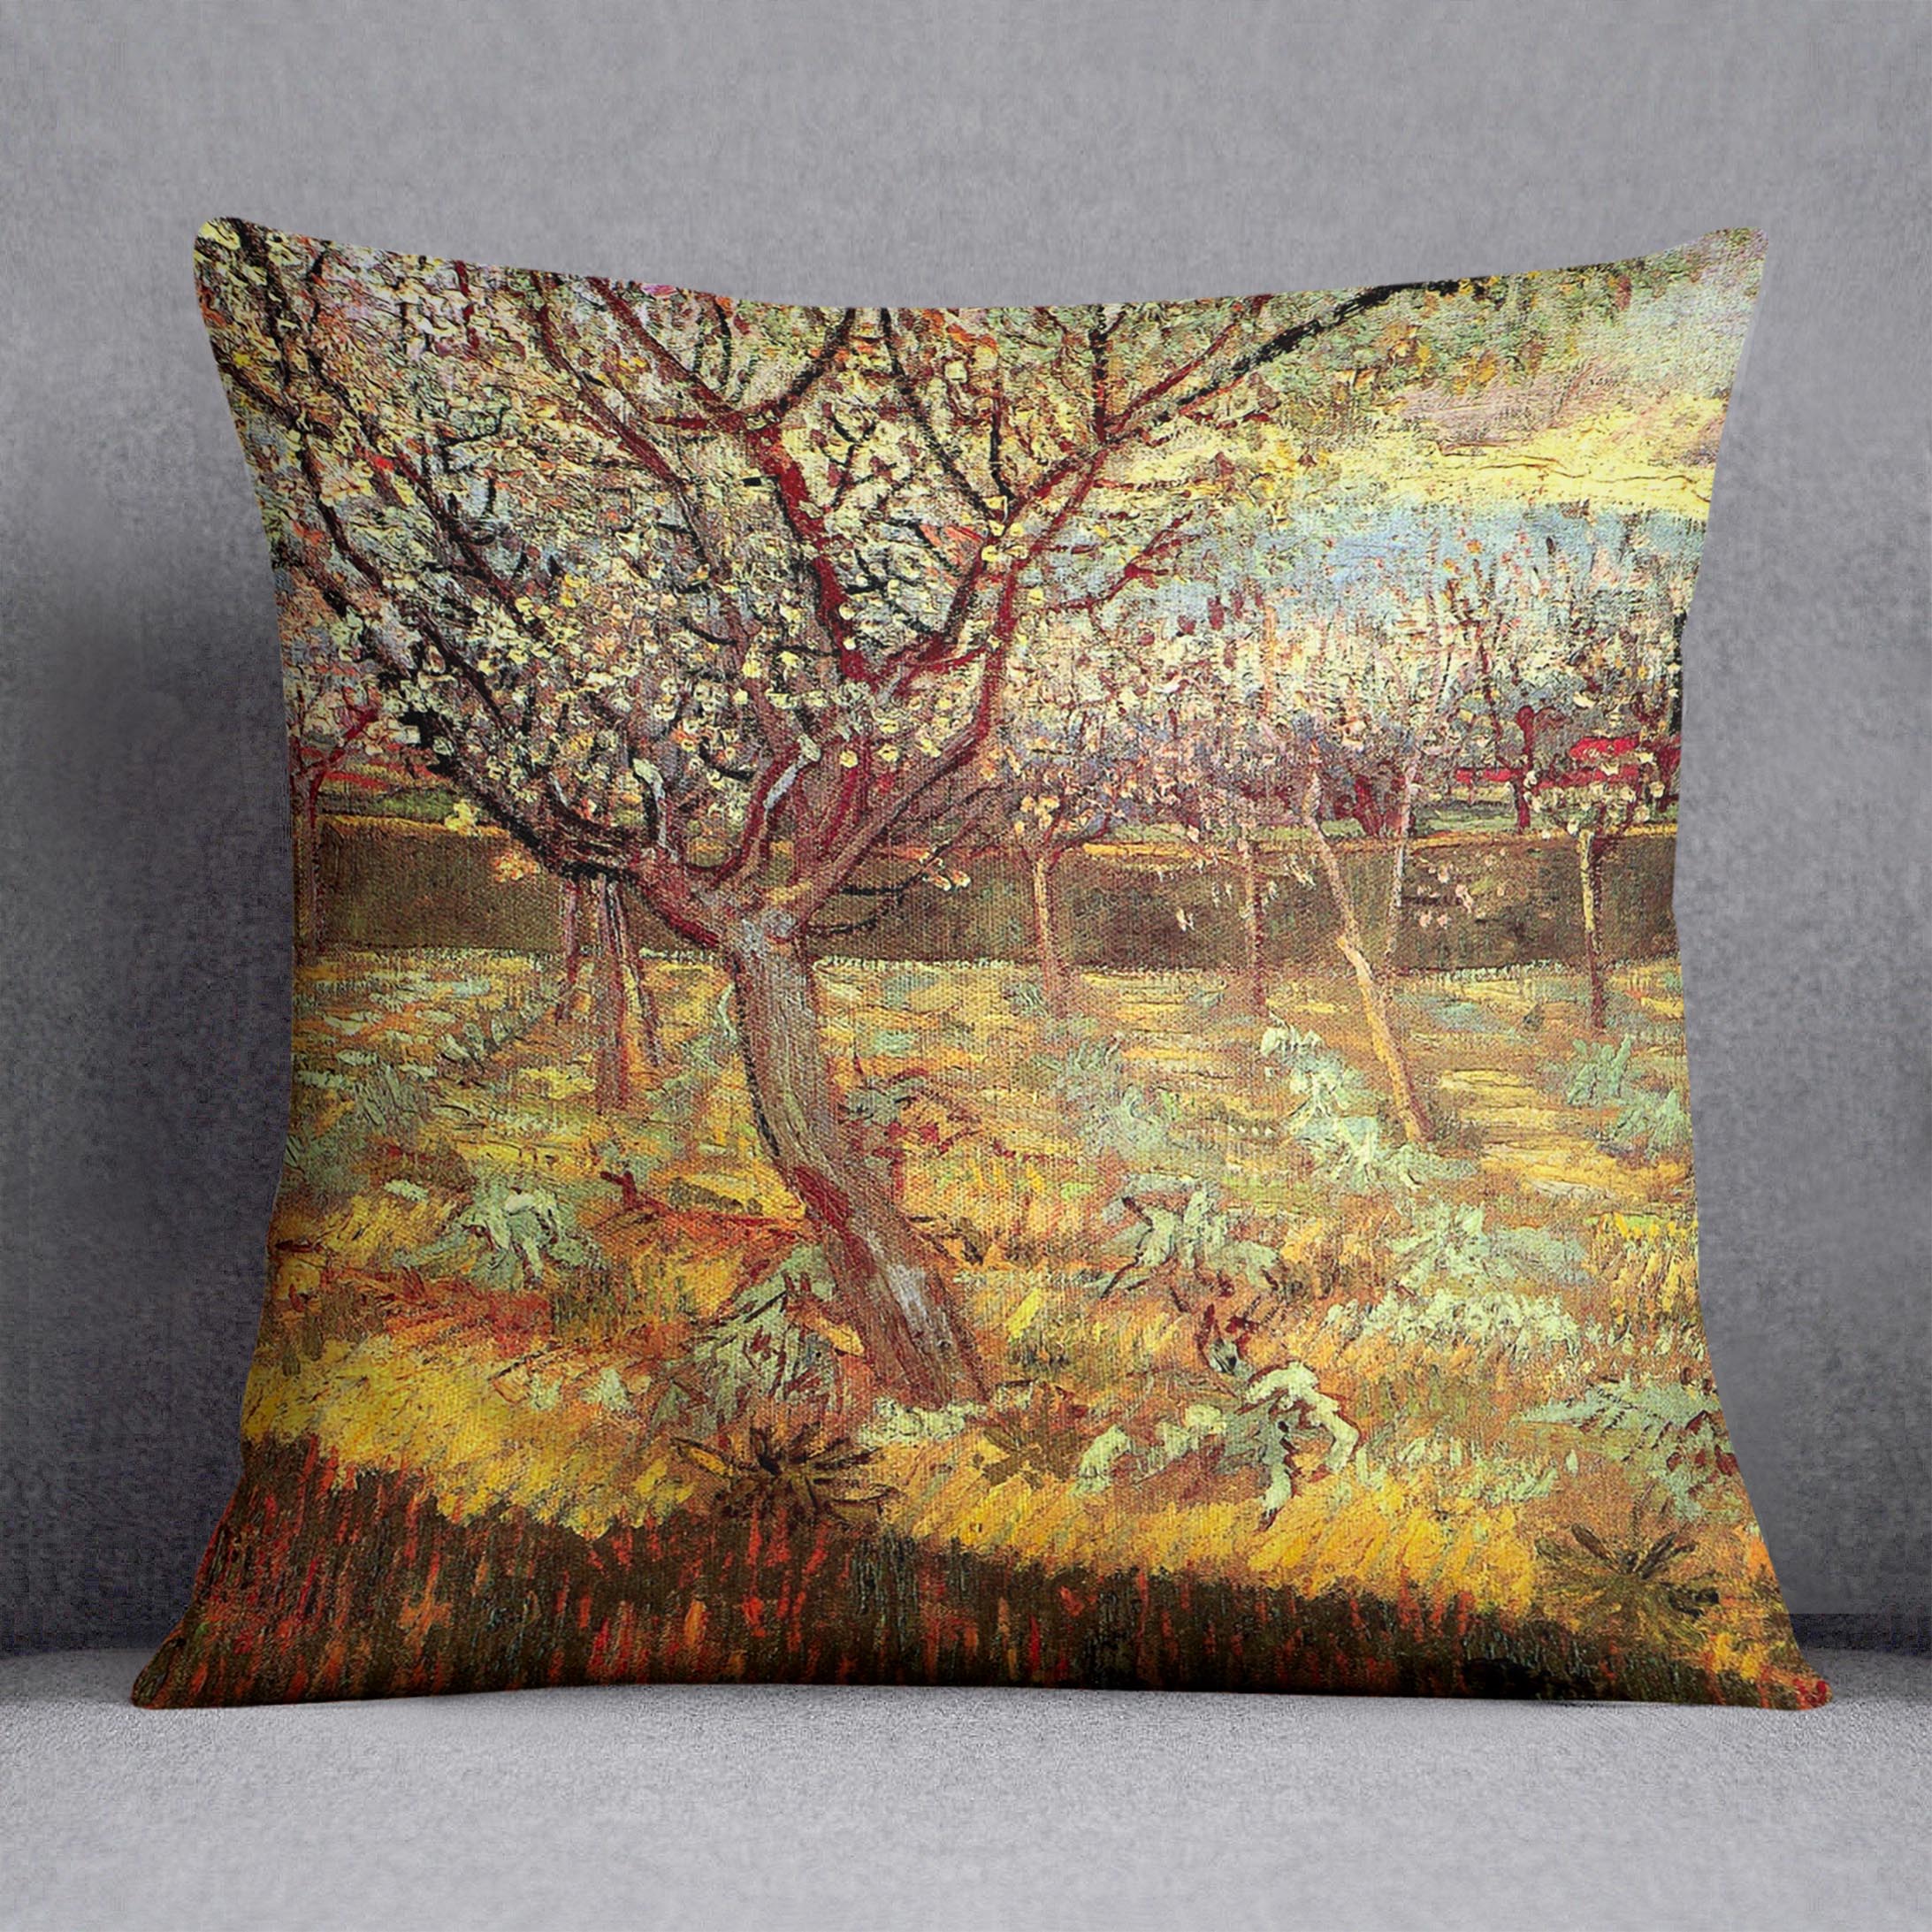 Apricot Trees in Blossom by Van Gogh Cushion